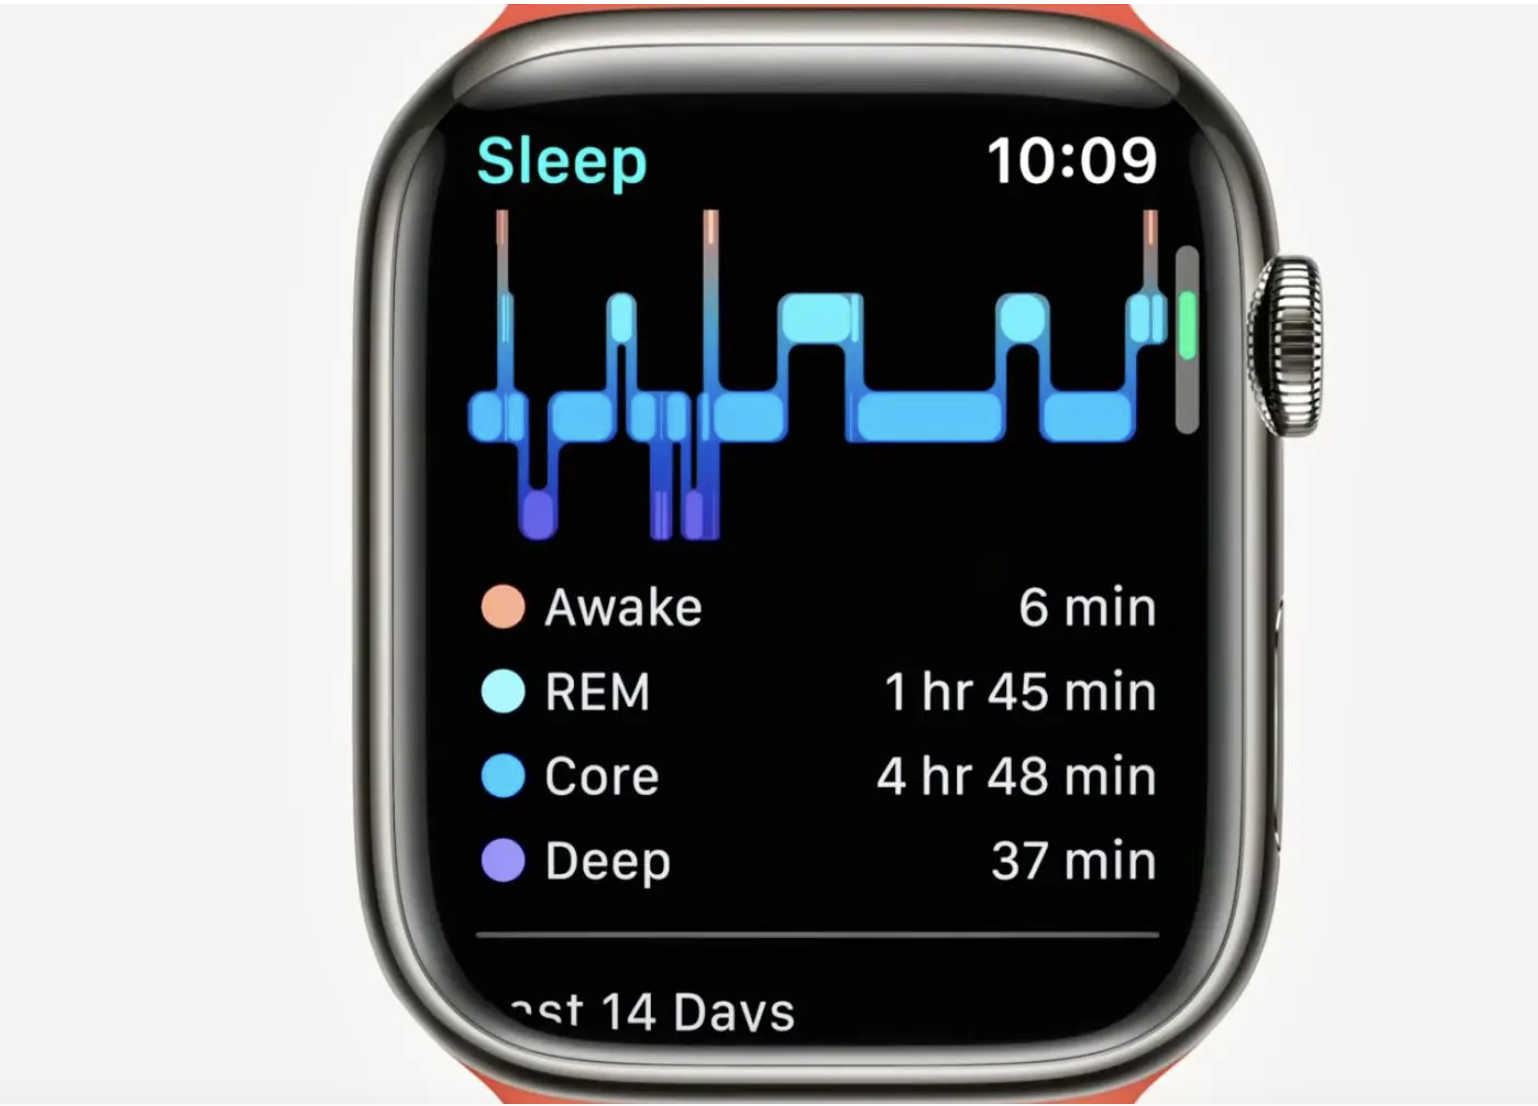 Guide to Sleep Trackers: Sleep Experts Review, Compare, and Test Top Sleep Trackers